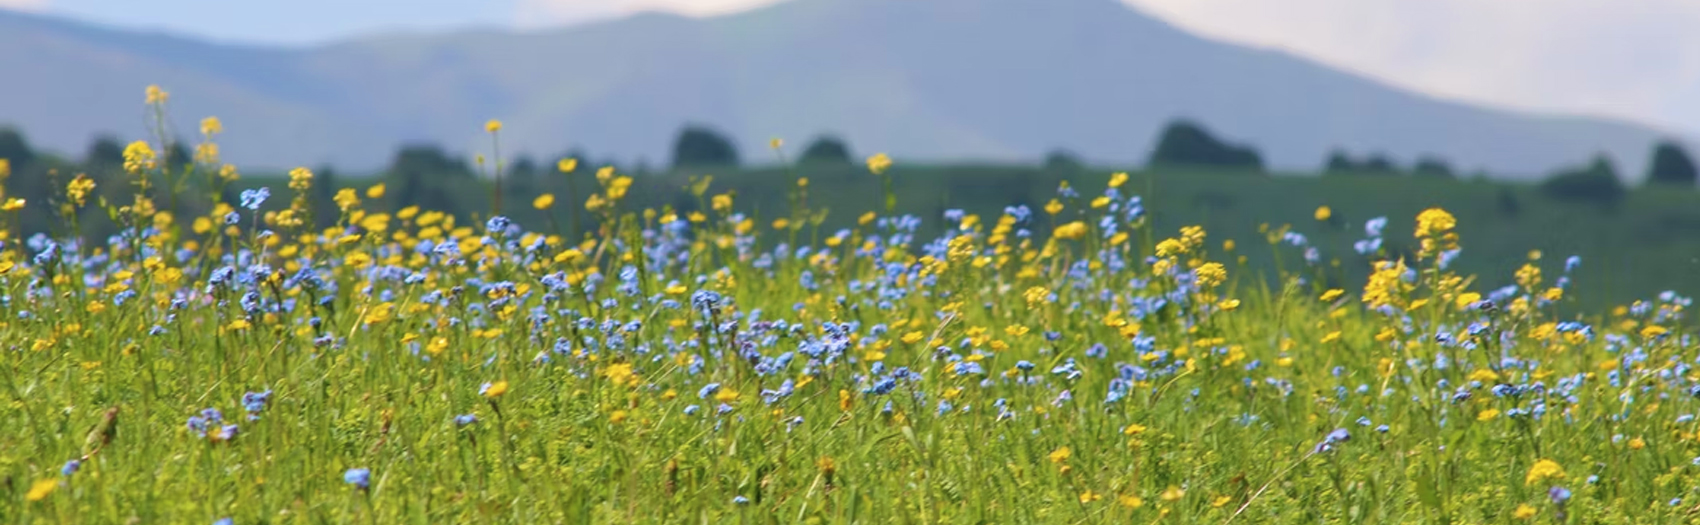 A field of blue and yellow flowers with mountains in the background